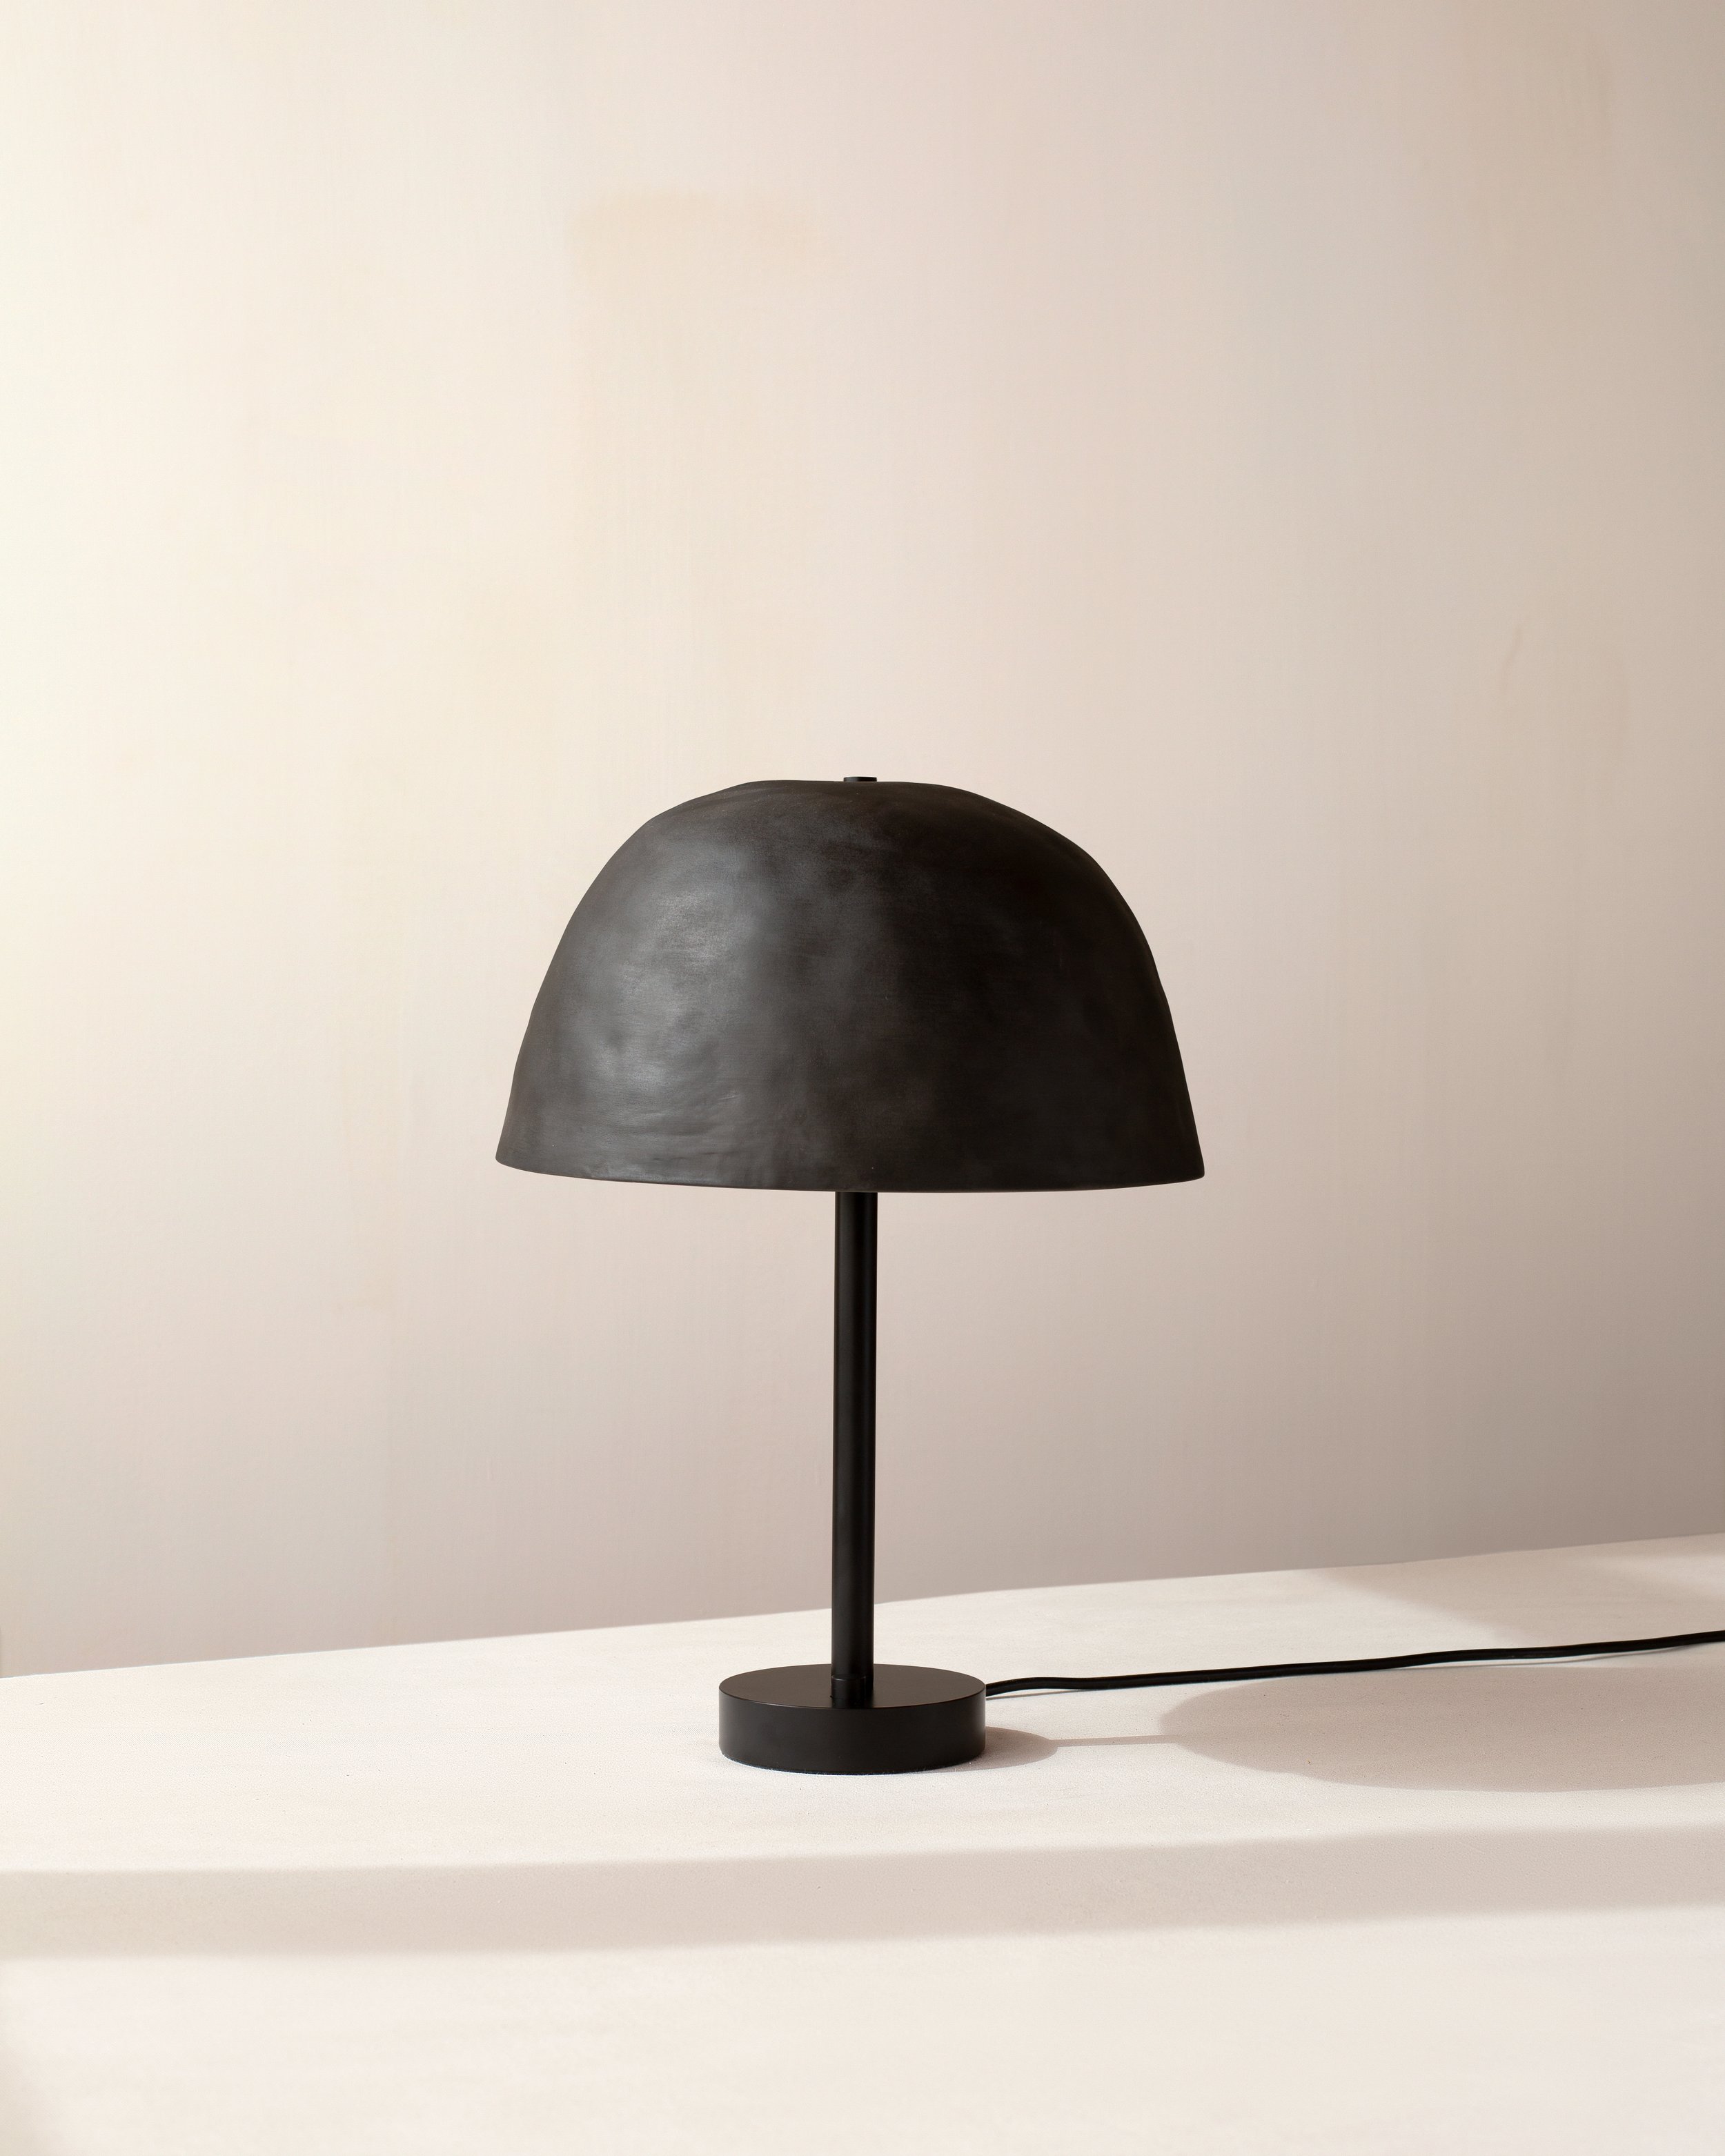 The Dome Table Lamp